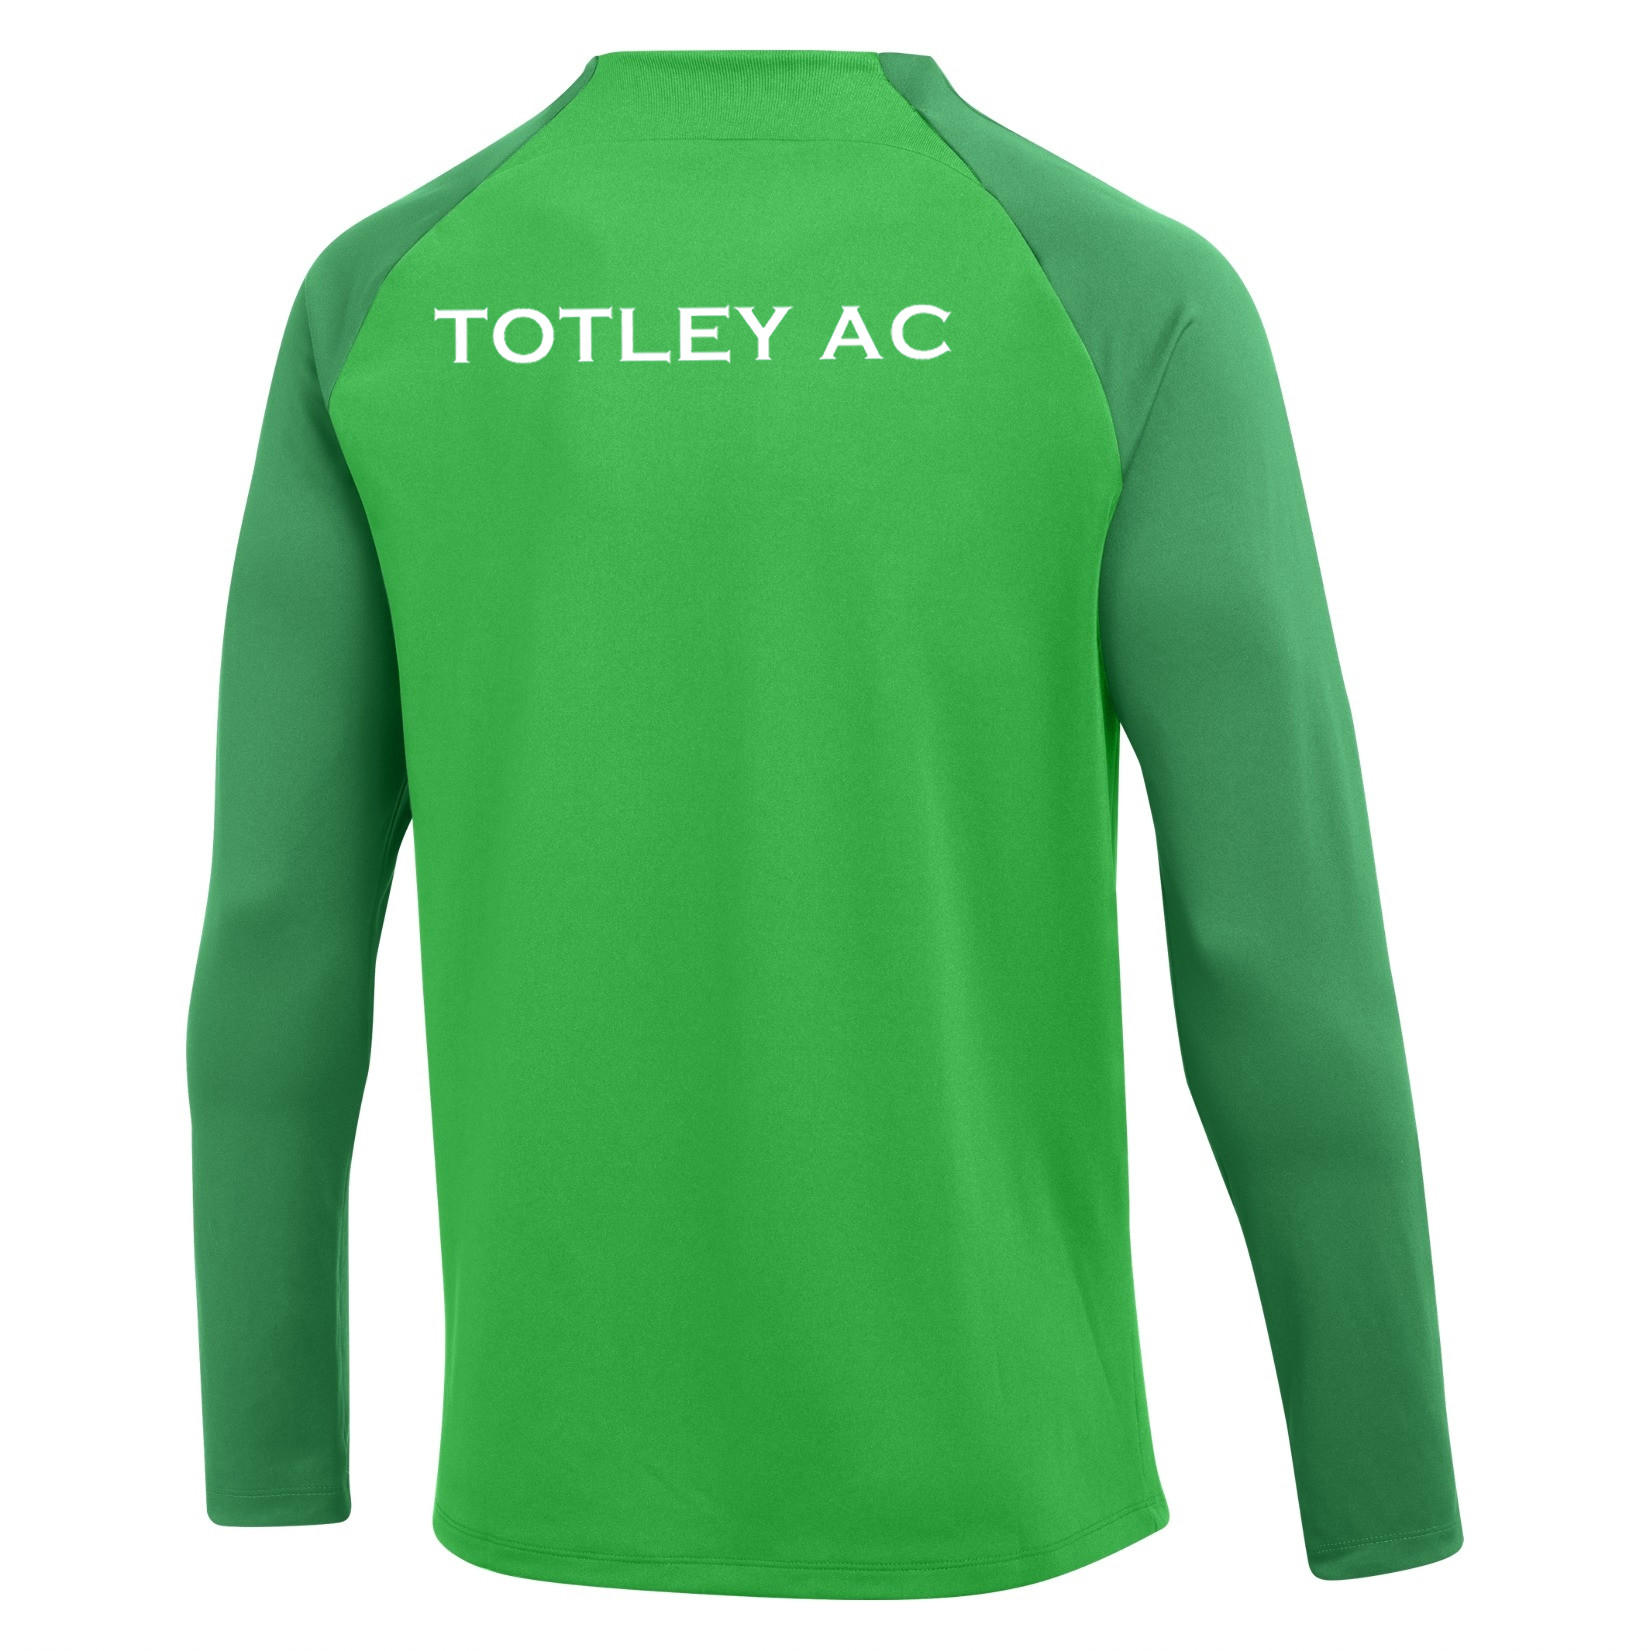 Nike Academy Pro Midlayer Drill Top Green Spark-Lucky Green-White